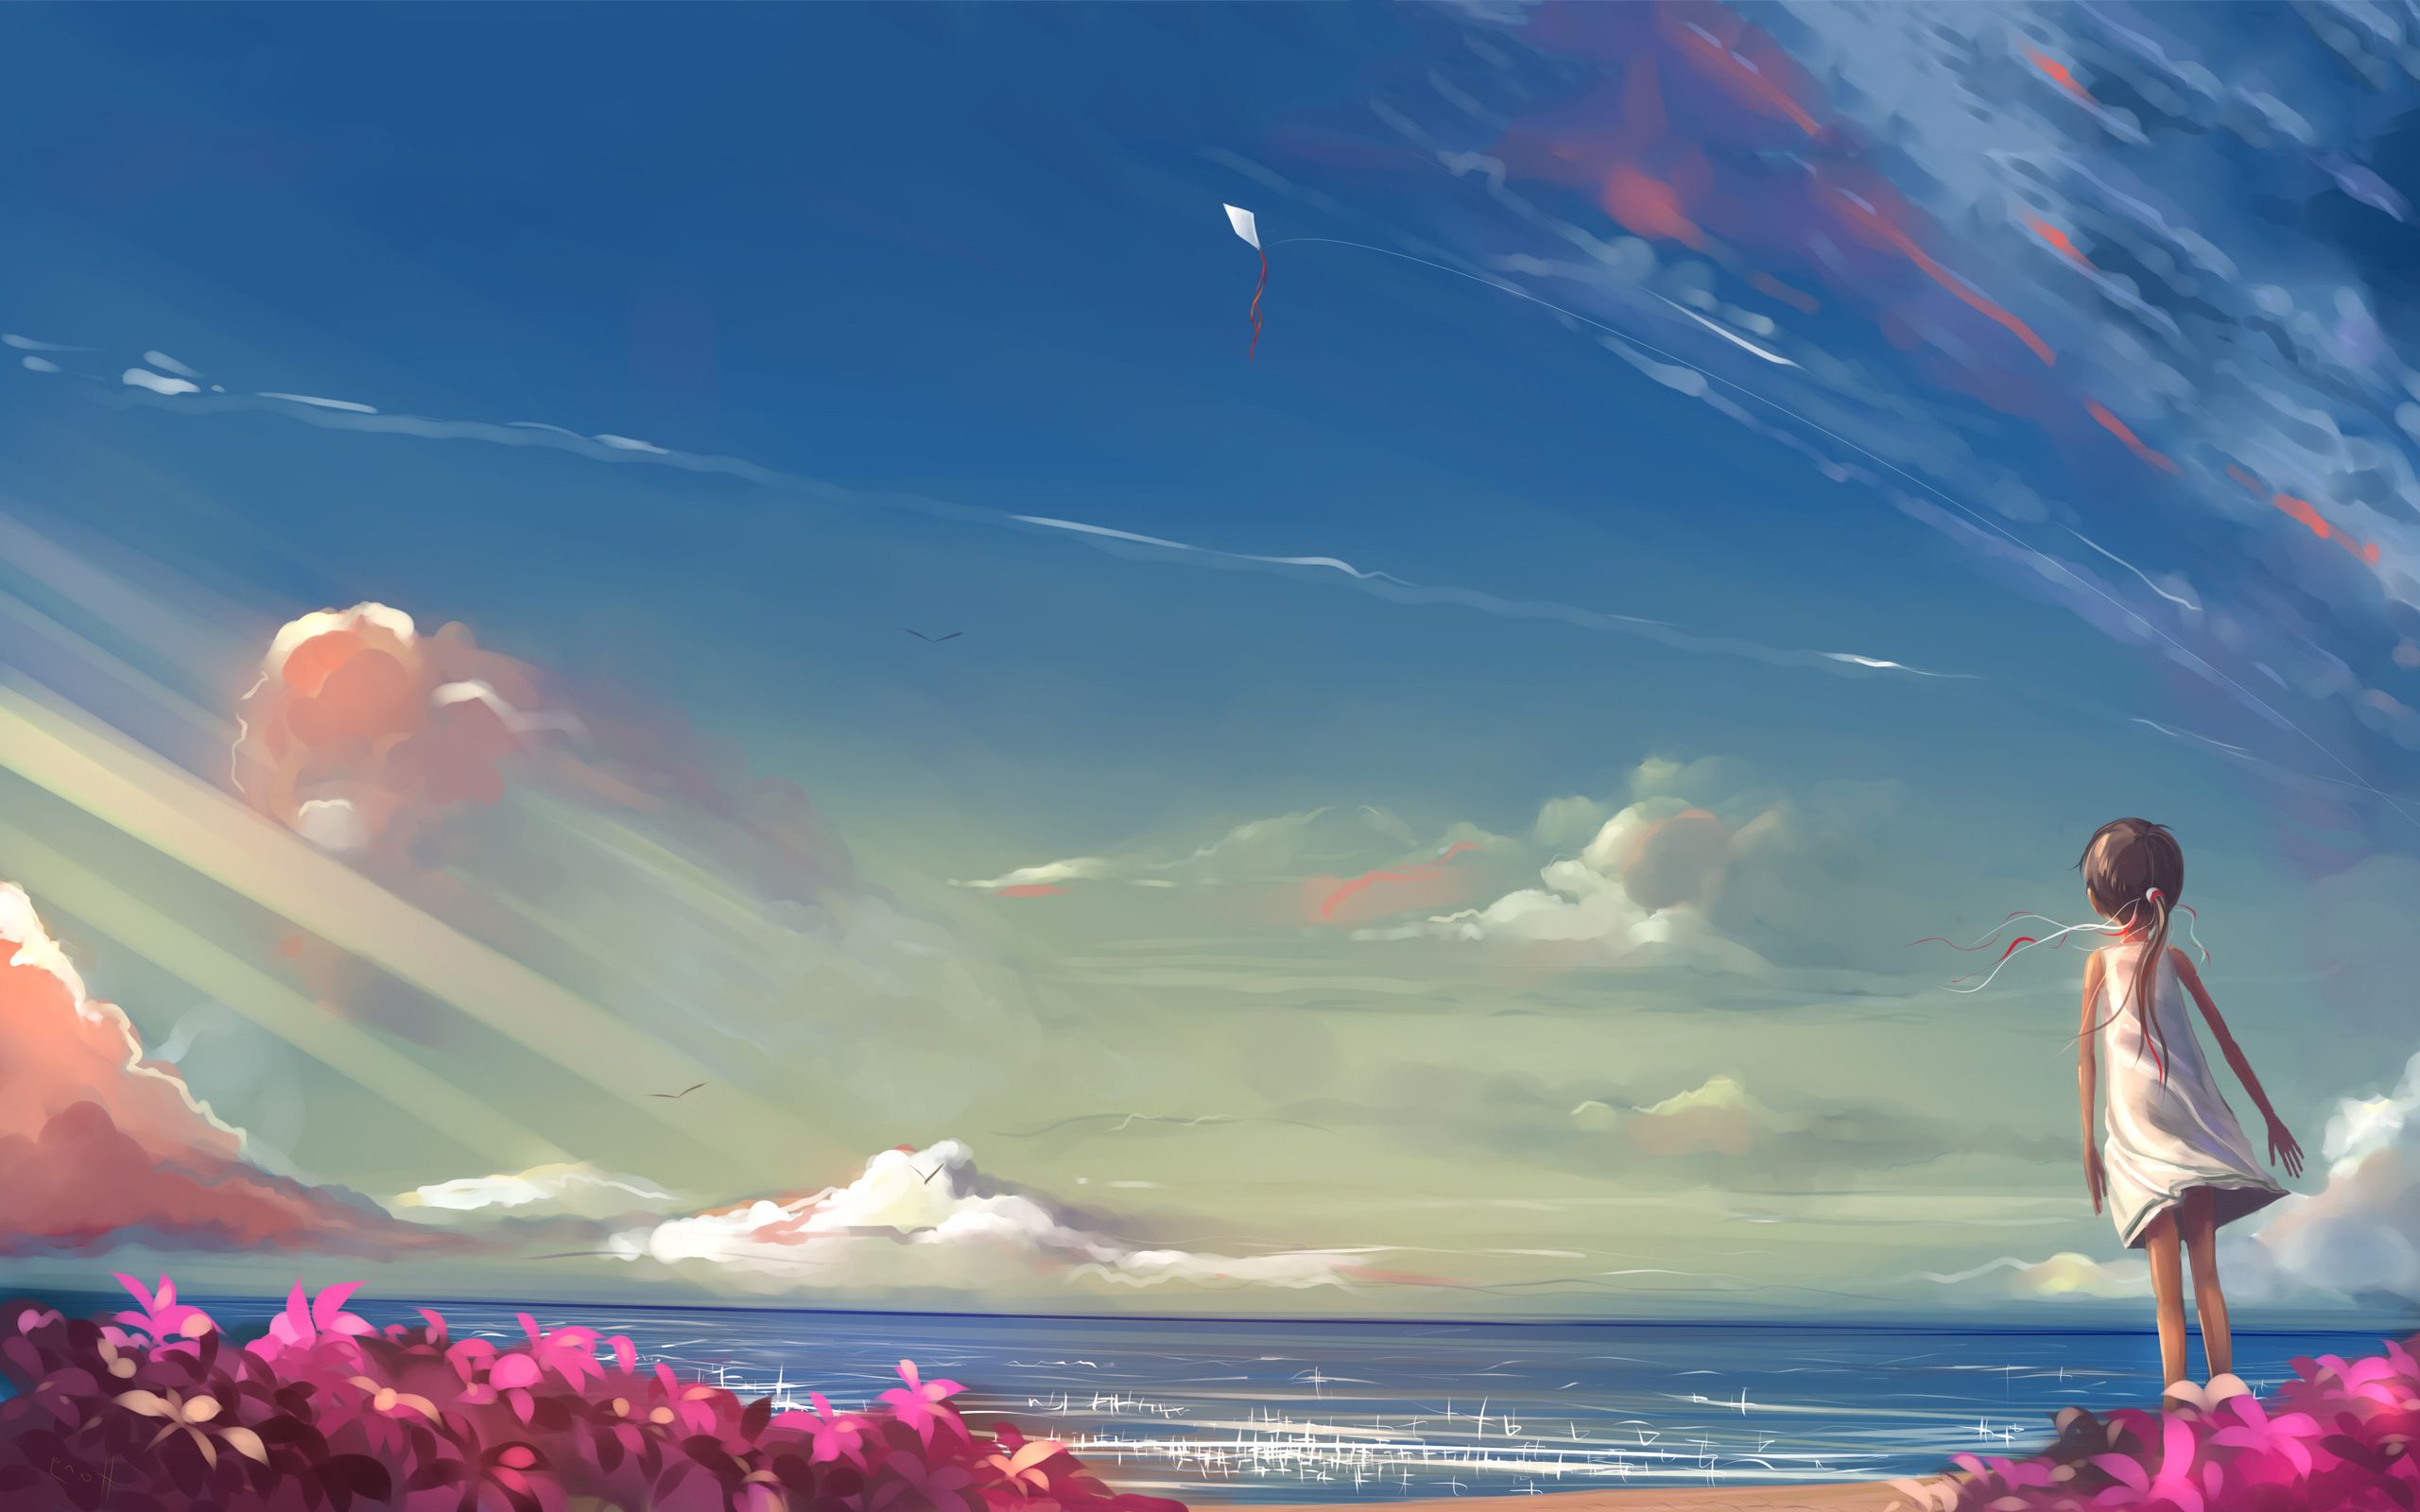 flying kites Image Search results. Anime scenery wallpaper